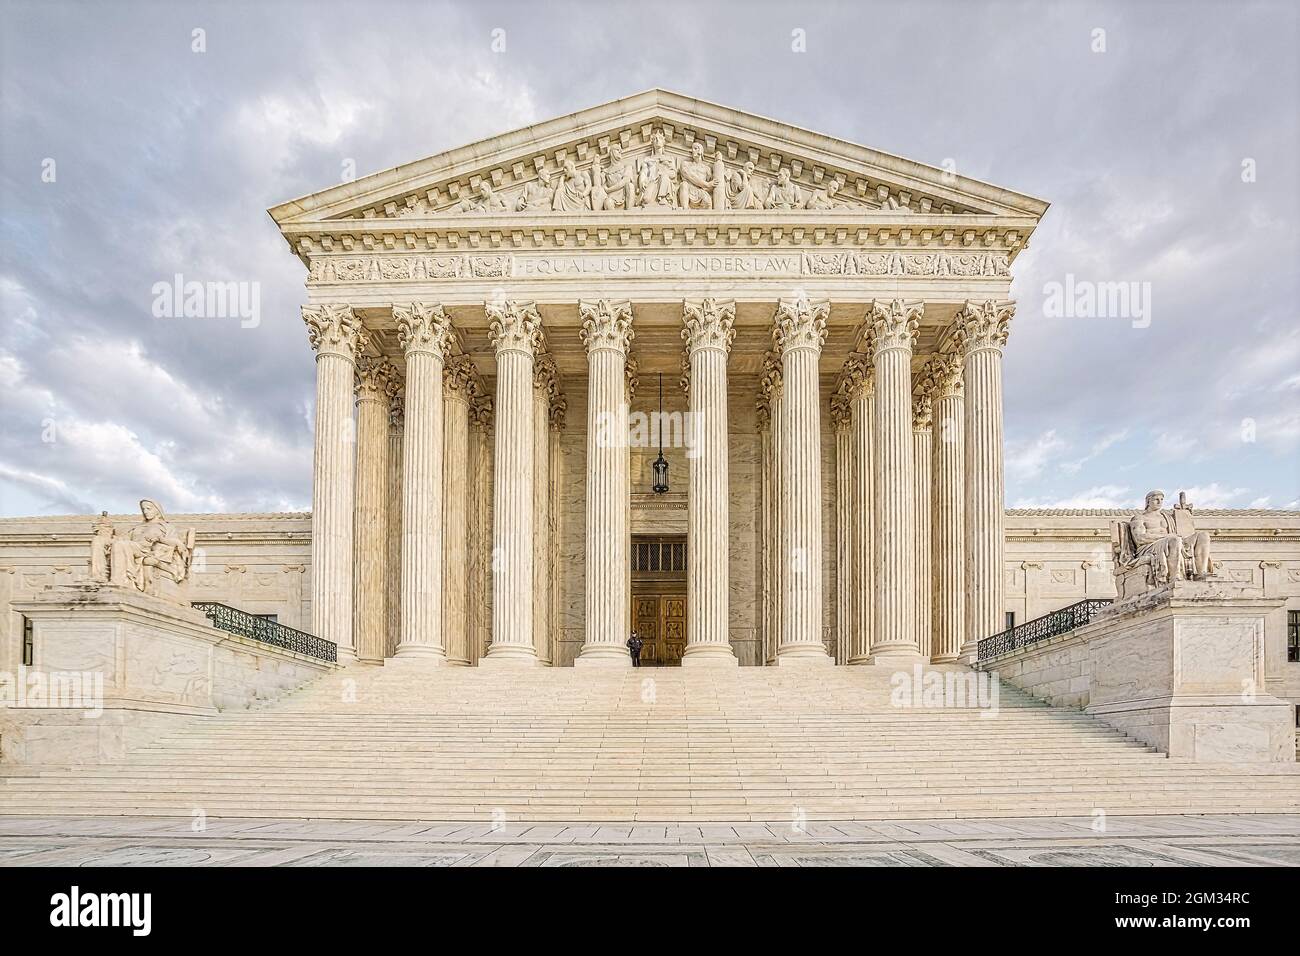 SCOTUS Equal Justice  - Supreme Court Of The United States in Washington DC. The highest federal court in the United States with its neoclassical arch Stock Photo